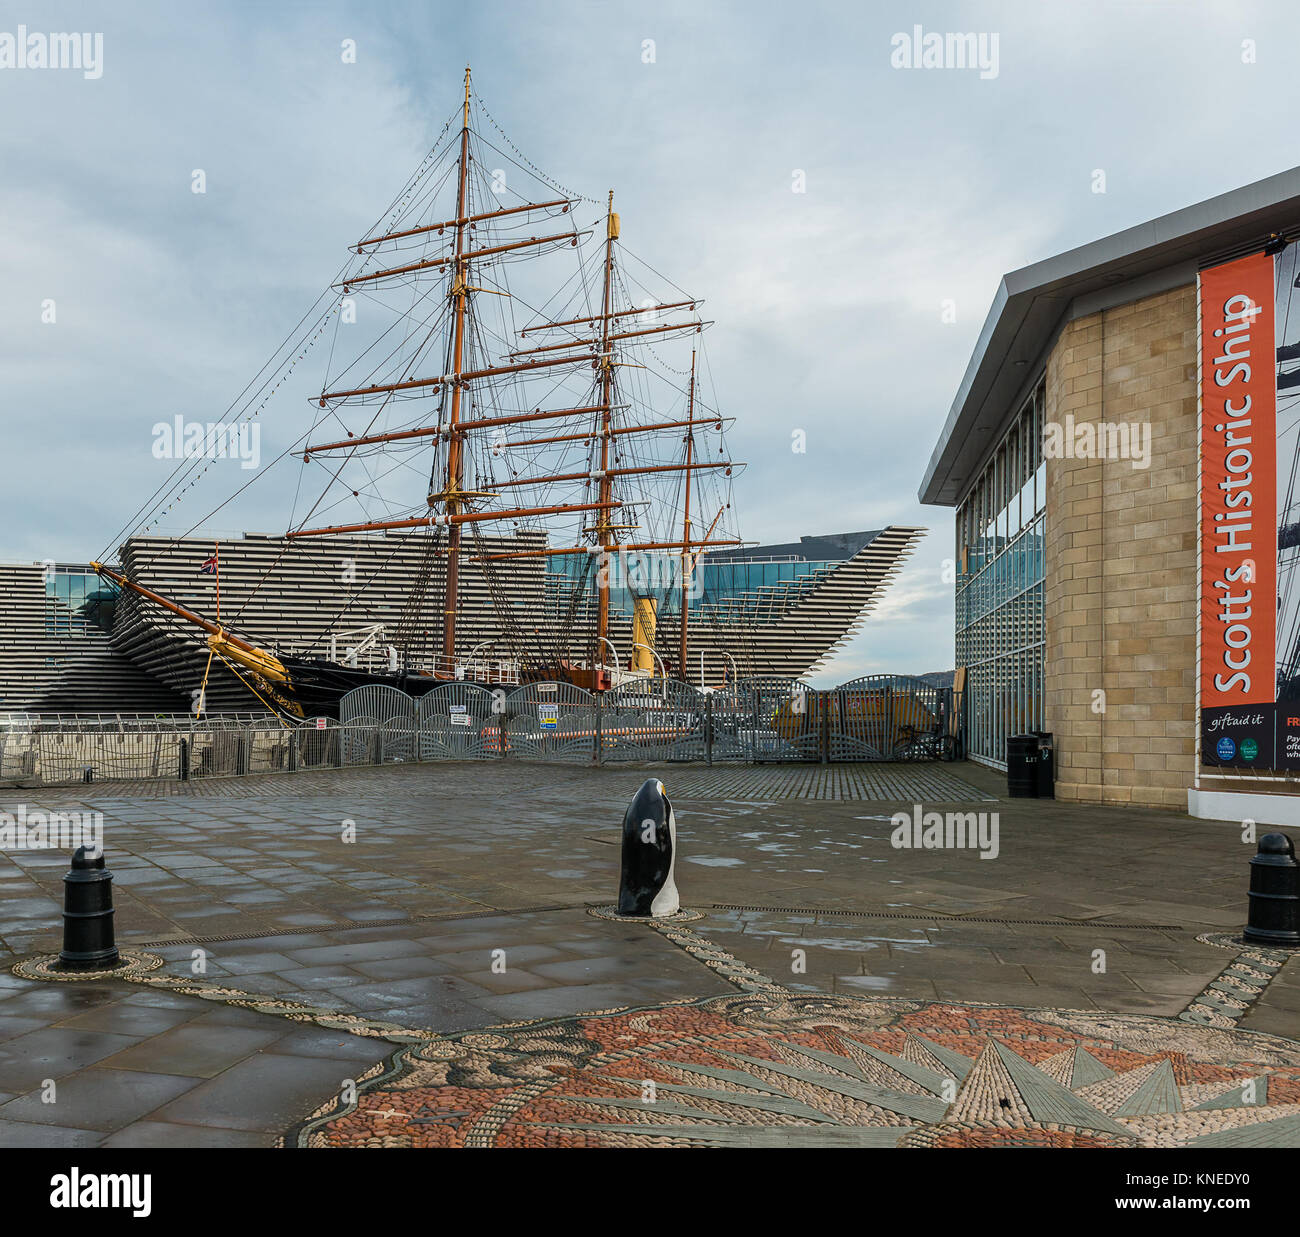 Dundee,Scotland,UK-December 05,2017: Scotts famous ship Discovery berthed next to the new V&A Museum of Design at the Dundee Waterfront presently unde Stock Photo